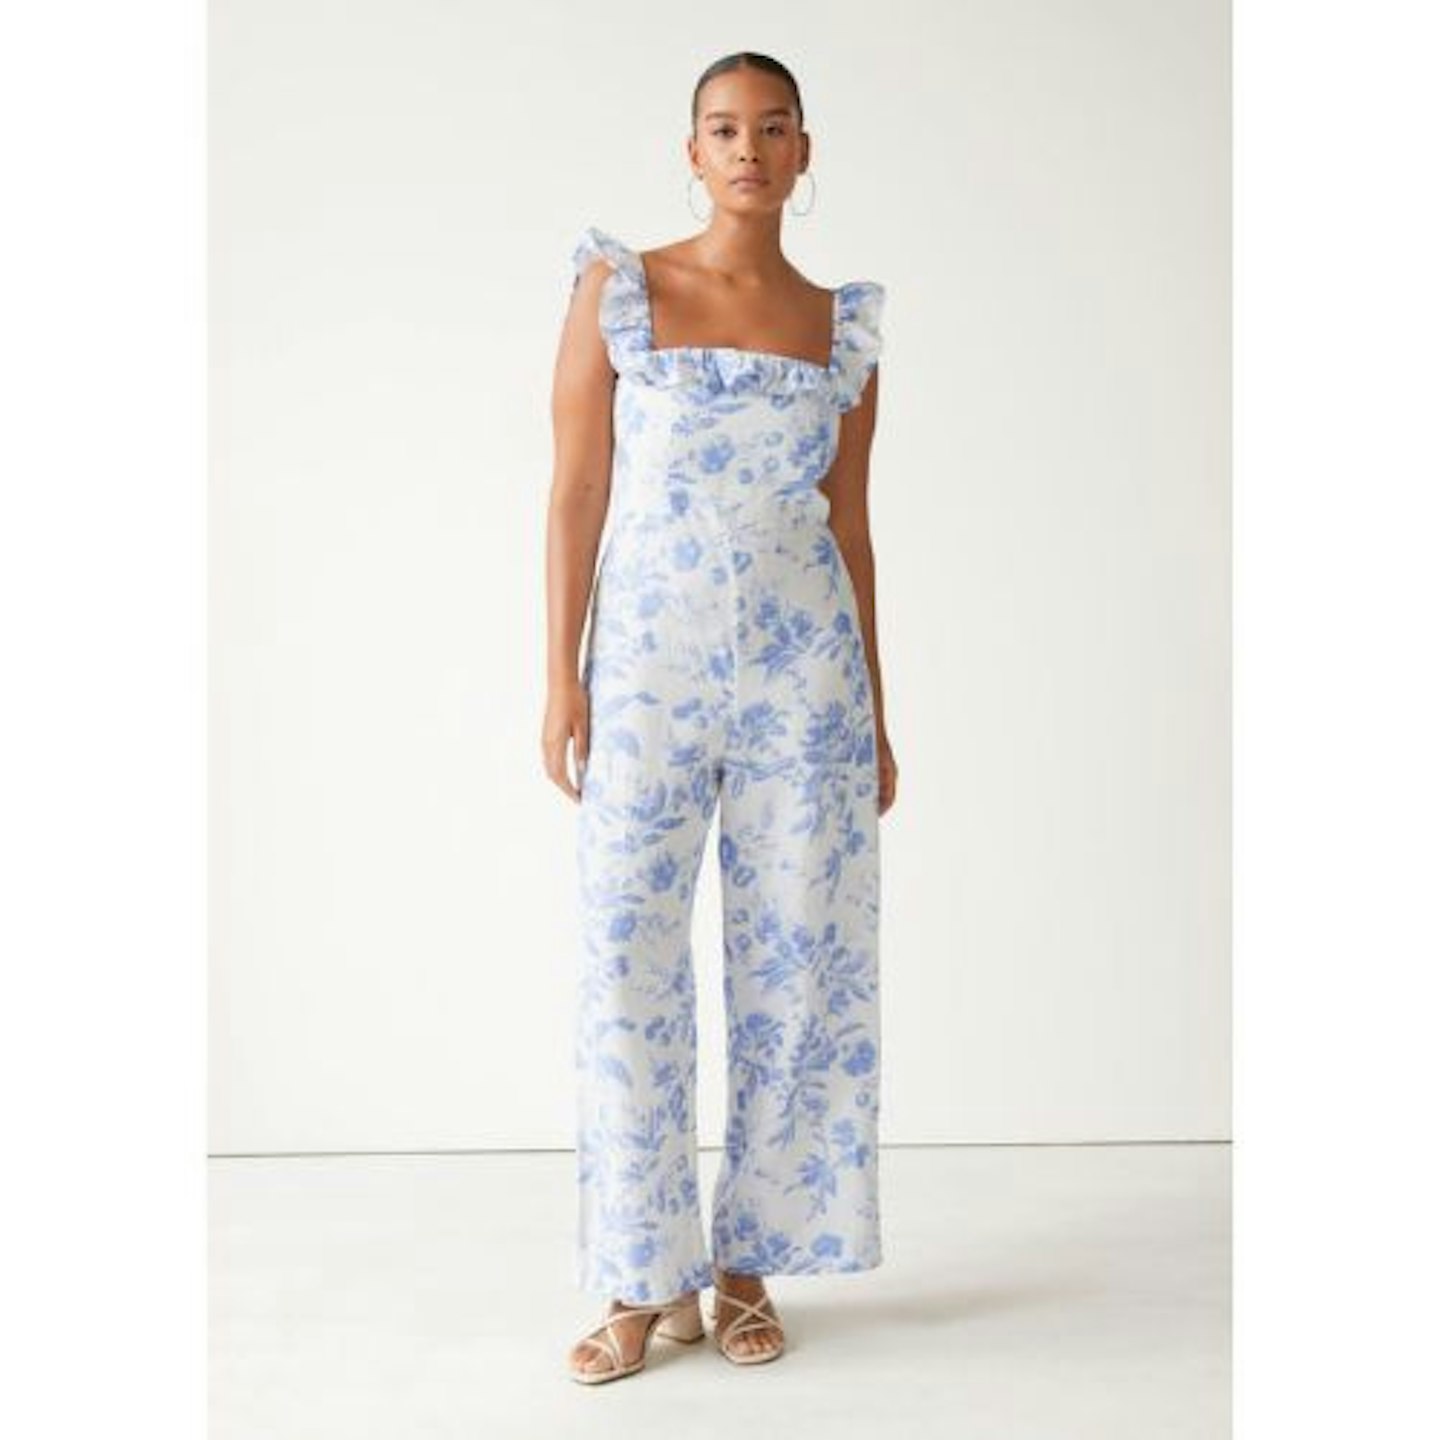 & Other Stories Printed Frilled Linen Jumpsuit